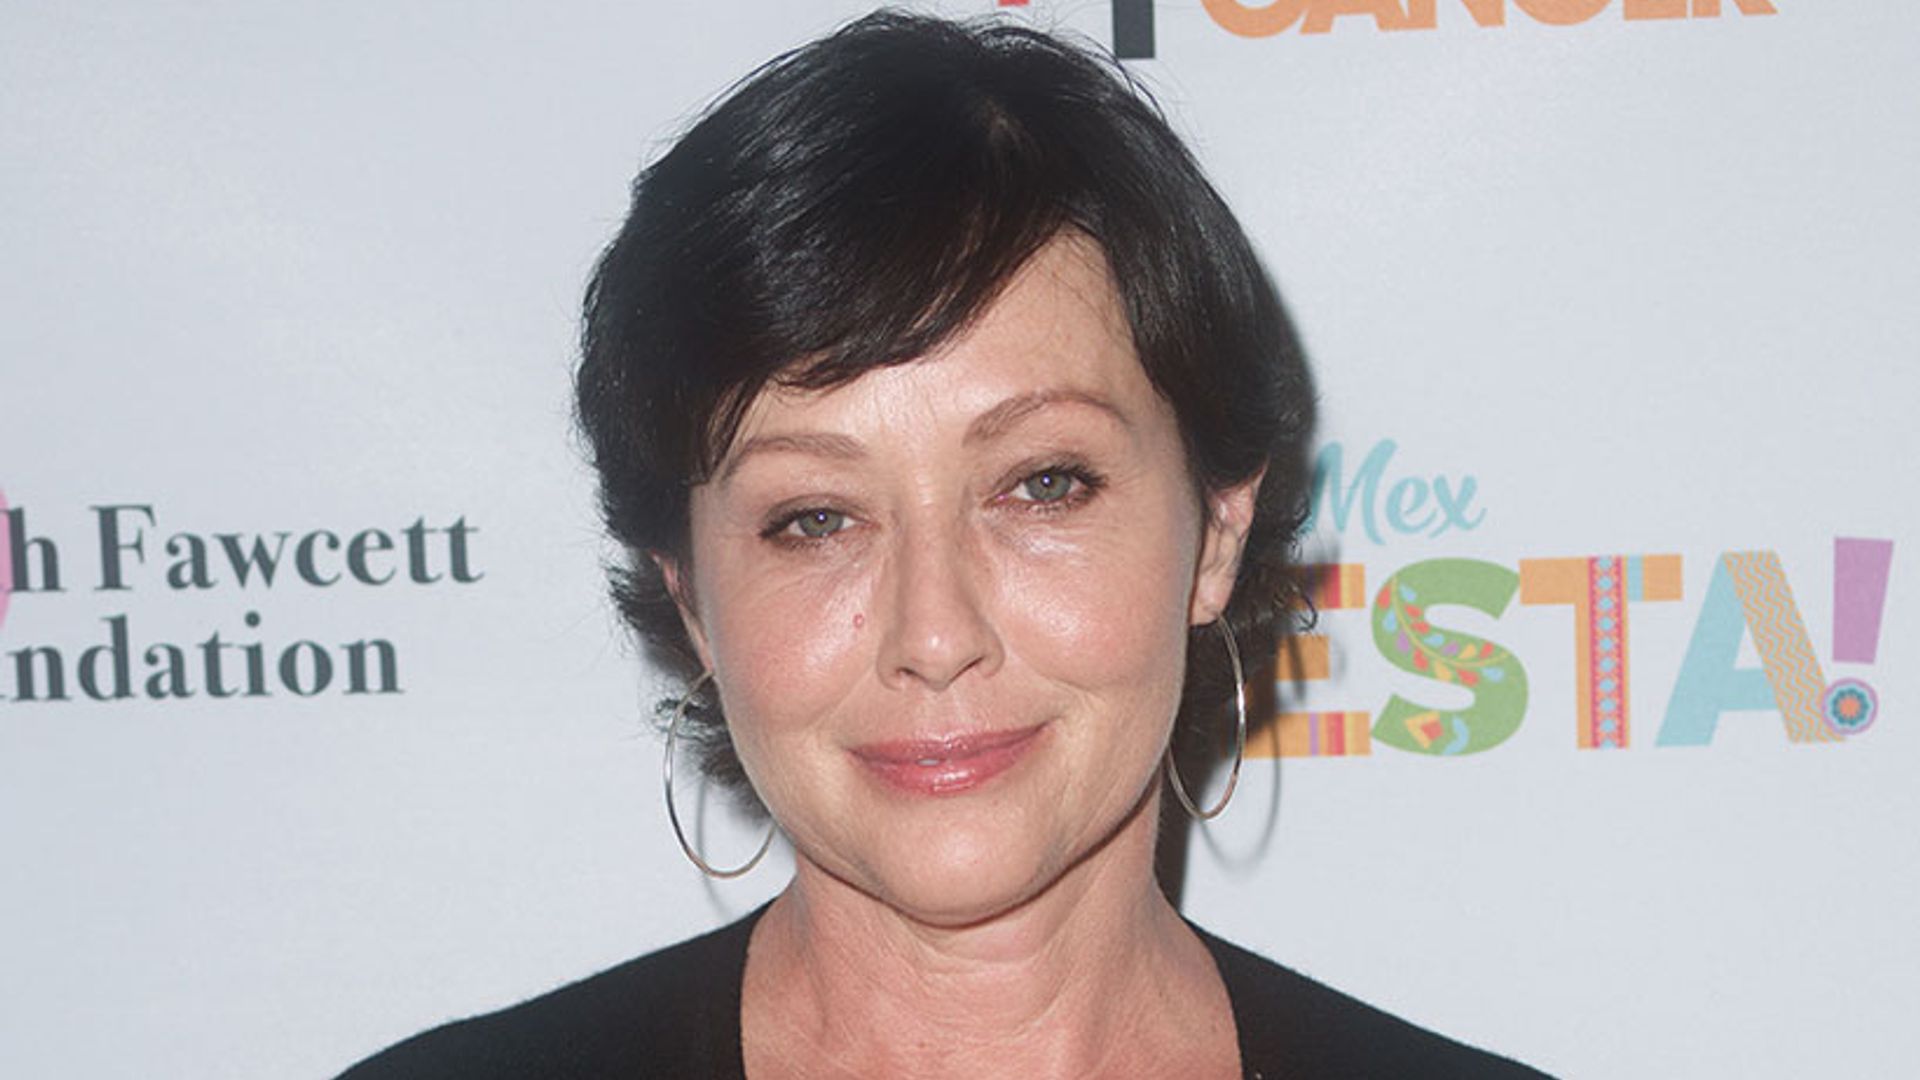 shannen doherty now